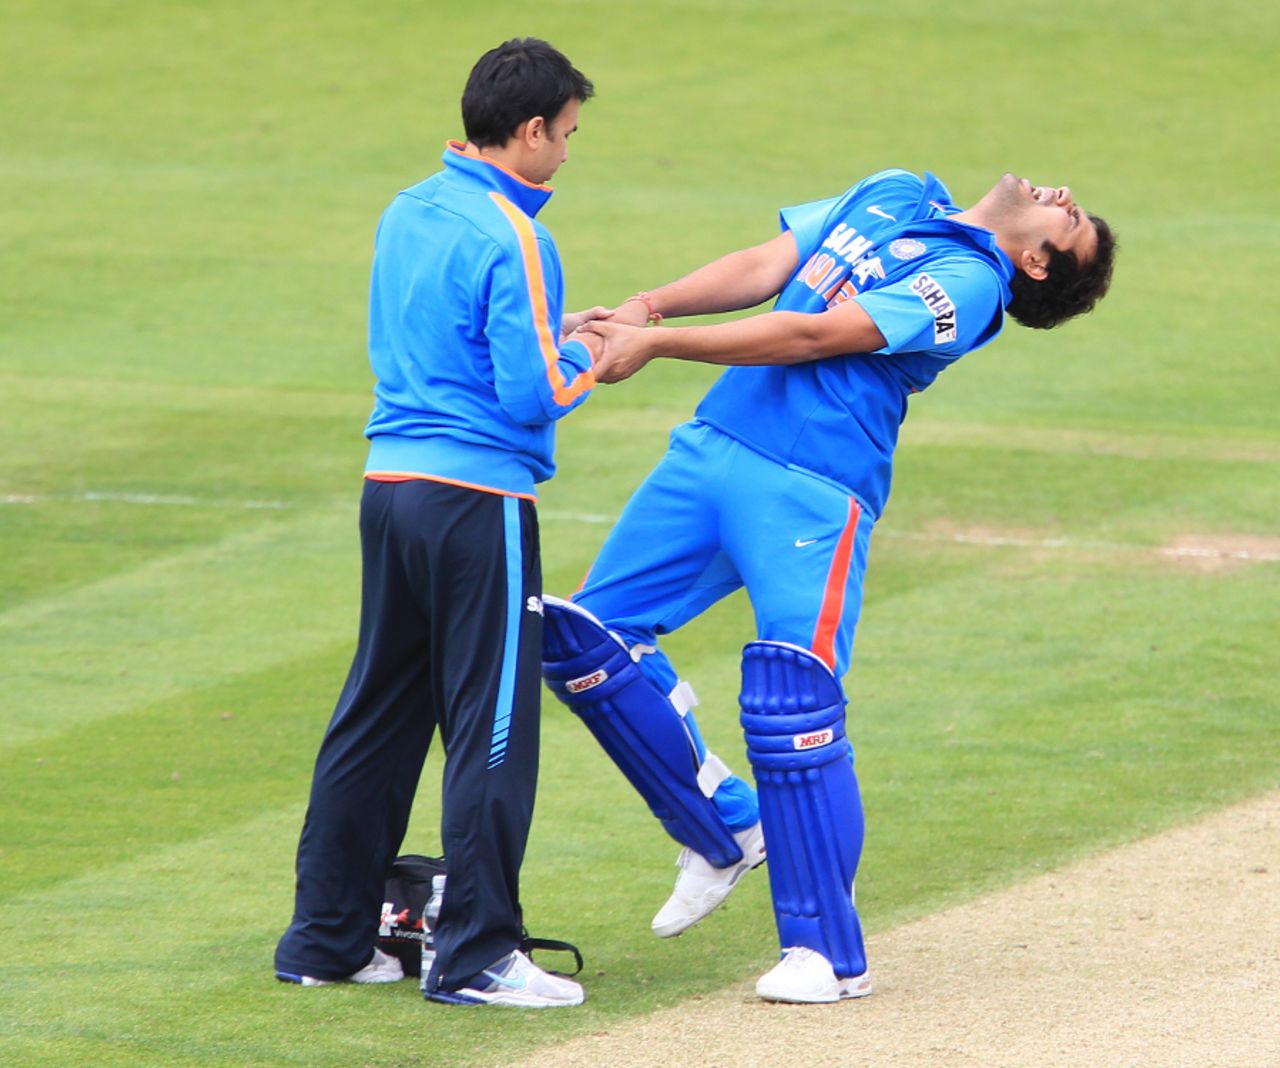 Rohit Sharma screams in pain as the team physiotherapist attends to his fractured finger, England v India, 1st ODI, Chester-le-Street, September 3, 2011